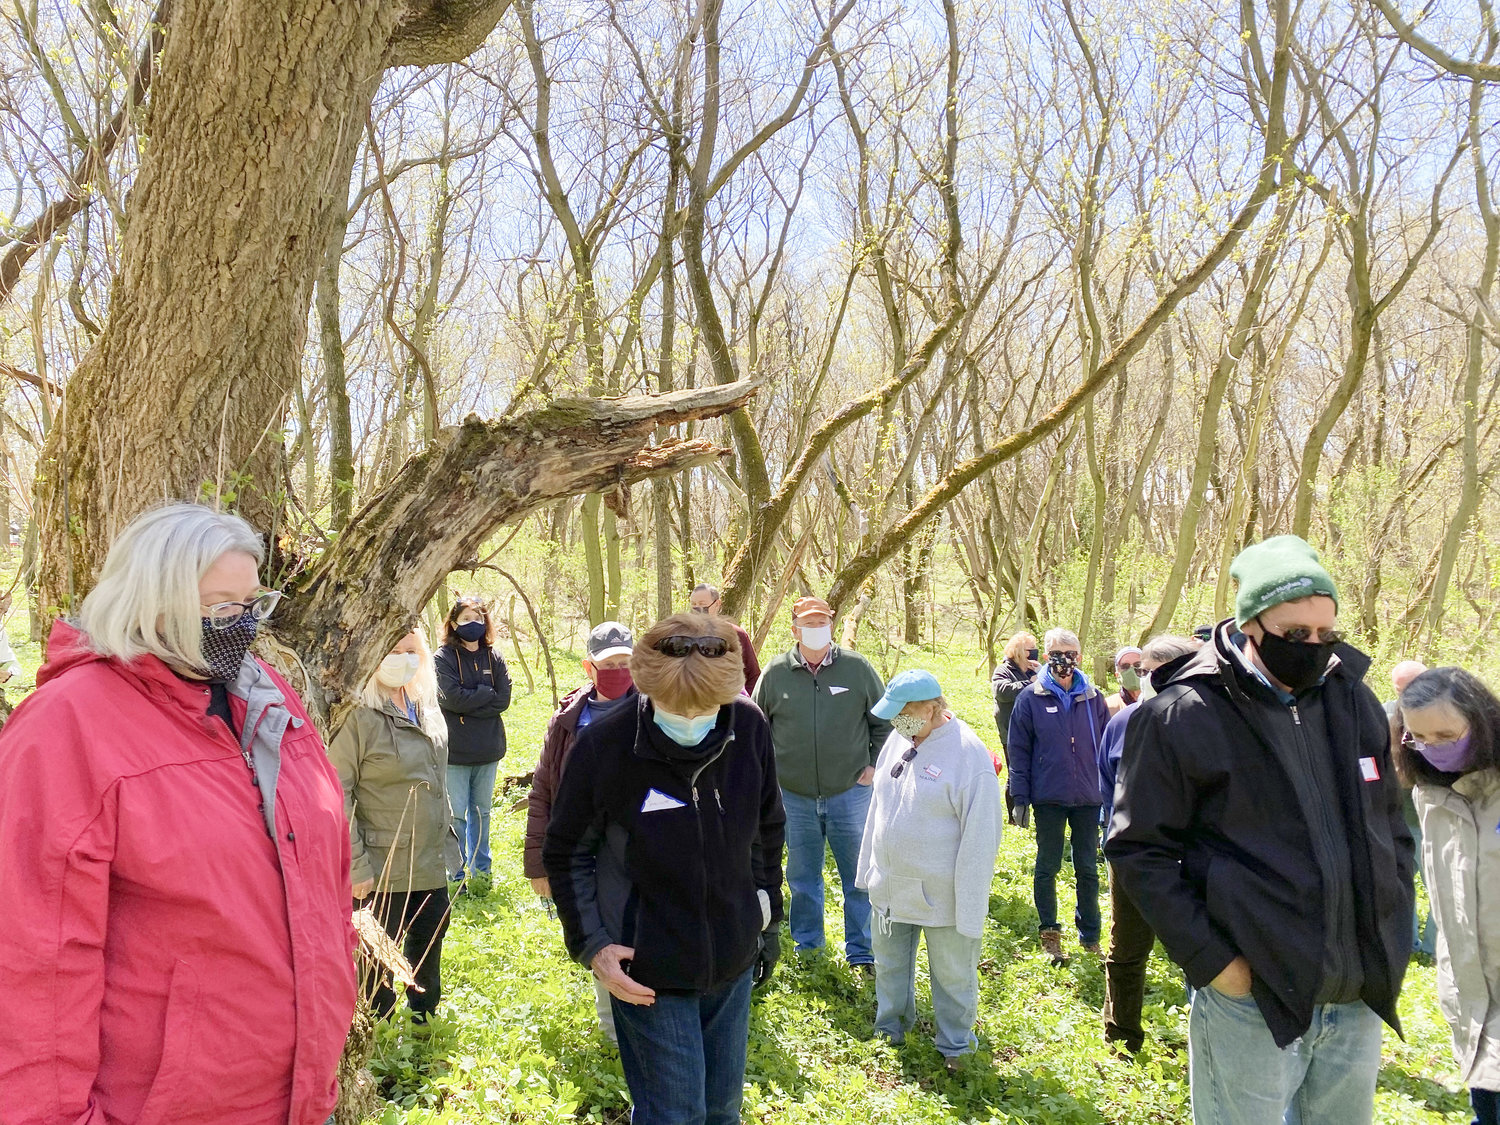 SPRING WALK — Visitors walk through the Gerrit Smith Estate during the 2021 guided spring walk. The 2022 guided spring walk will take place on Saturday, April 23 at 3 p.m. For more information, visit www.gerritsmith.org or call 315-374-9605